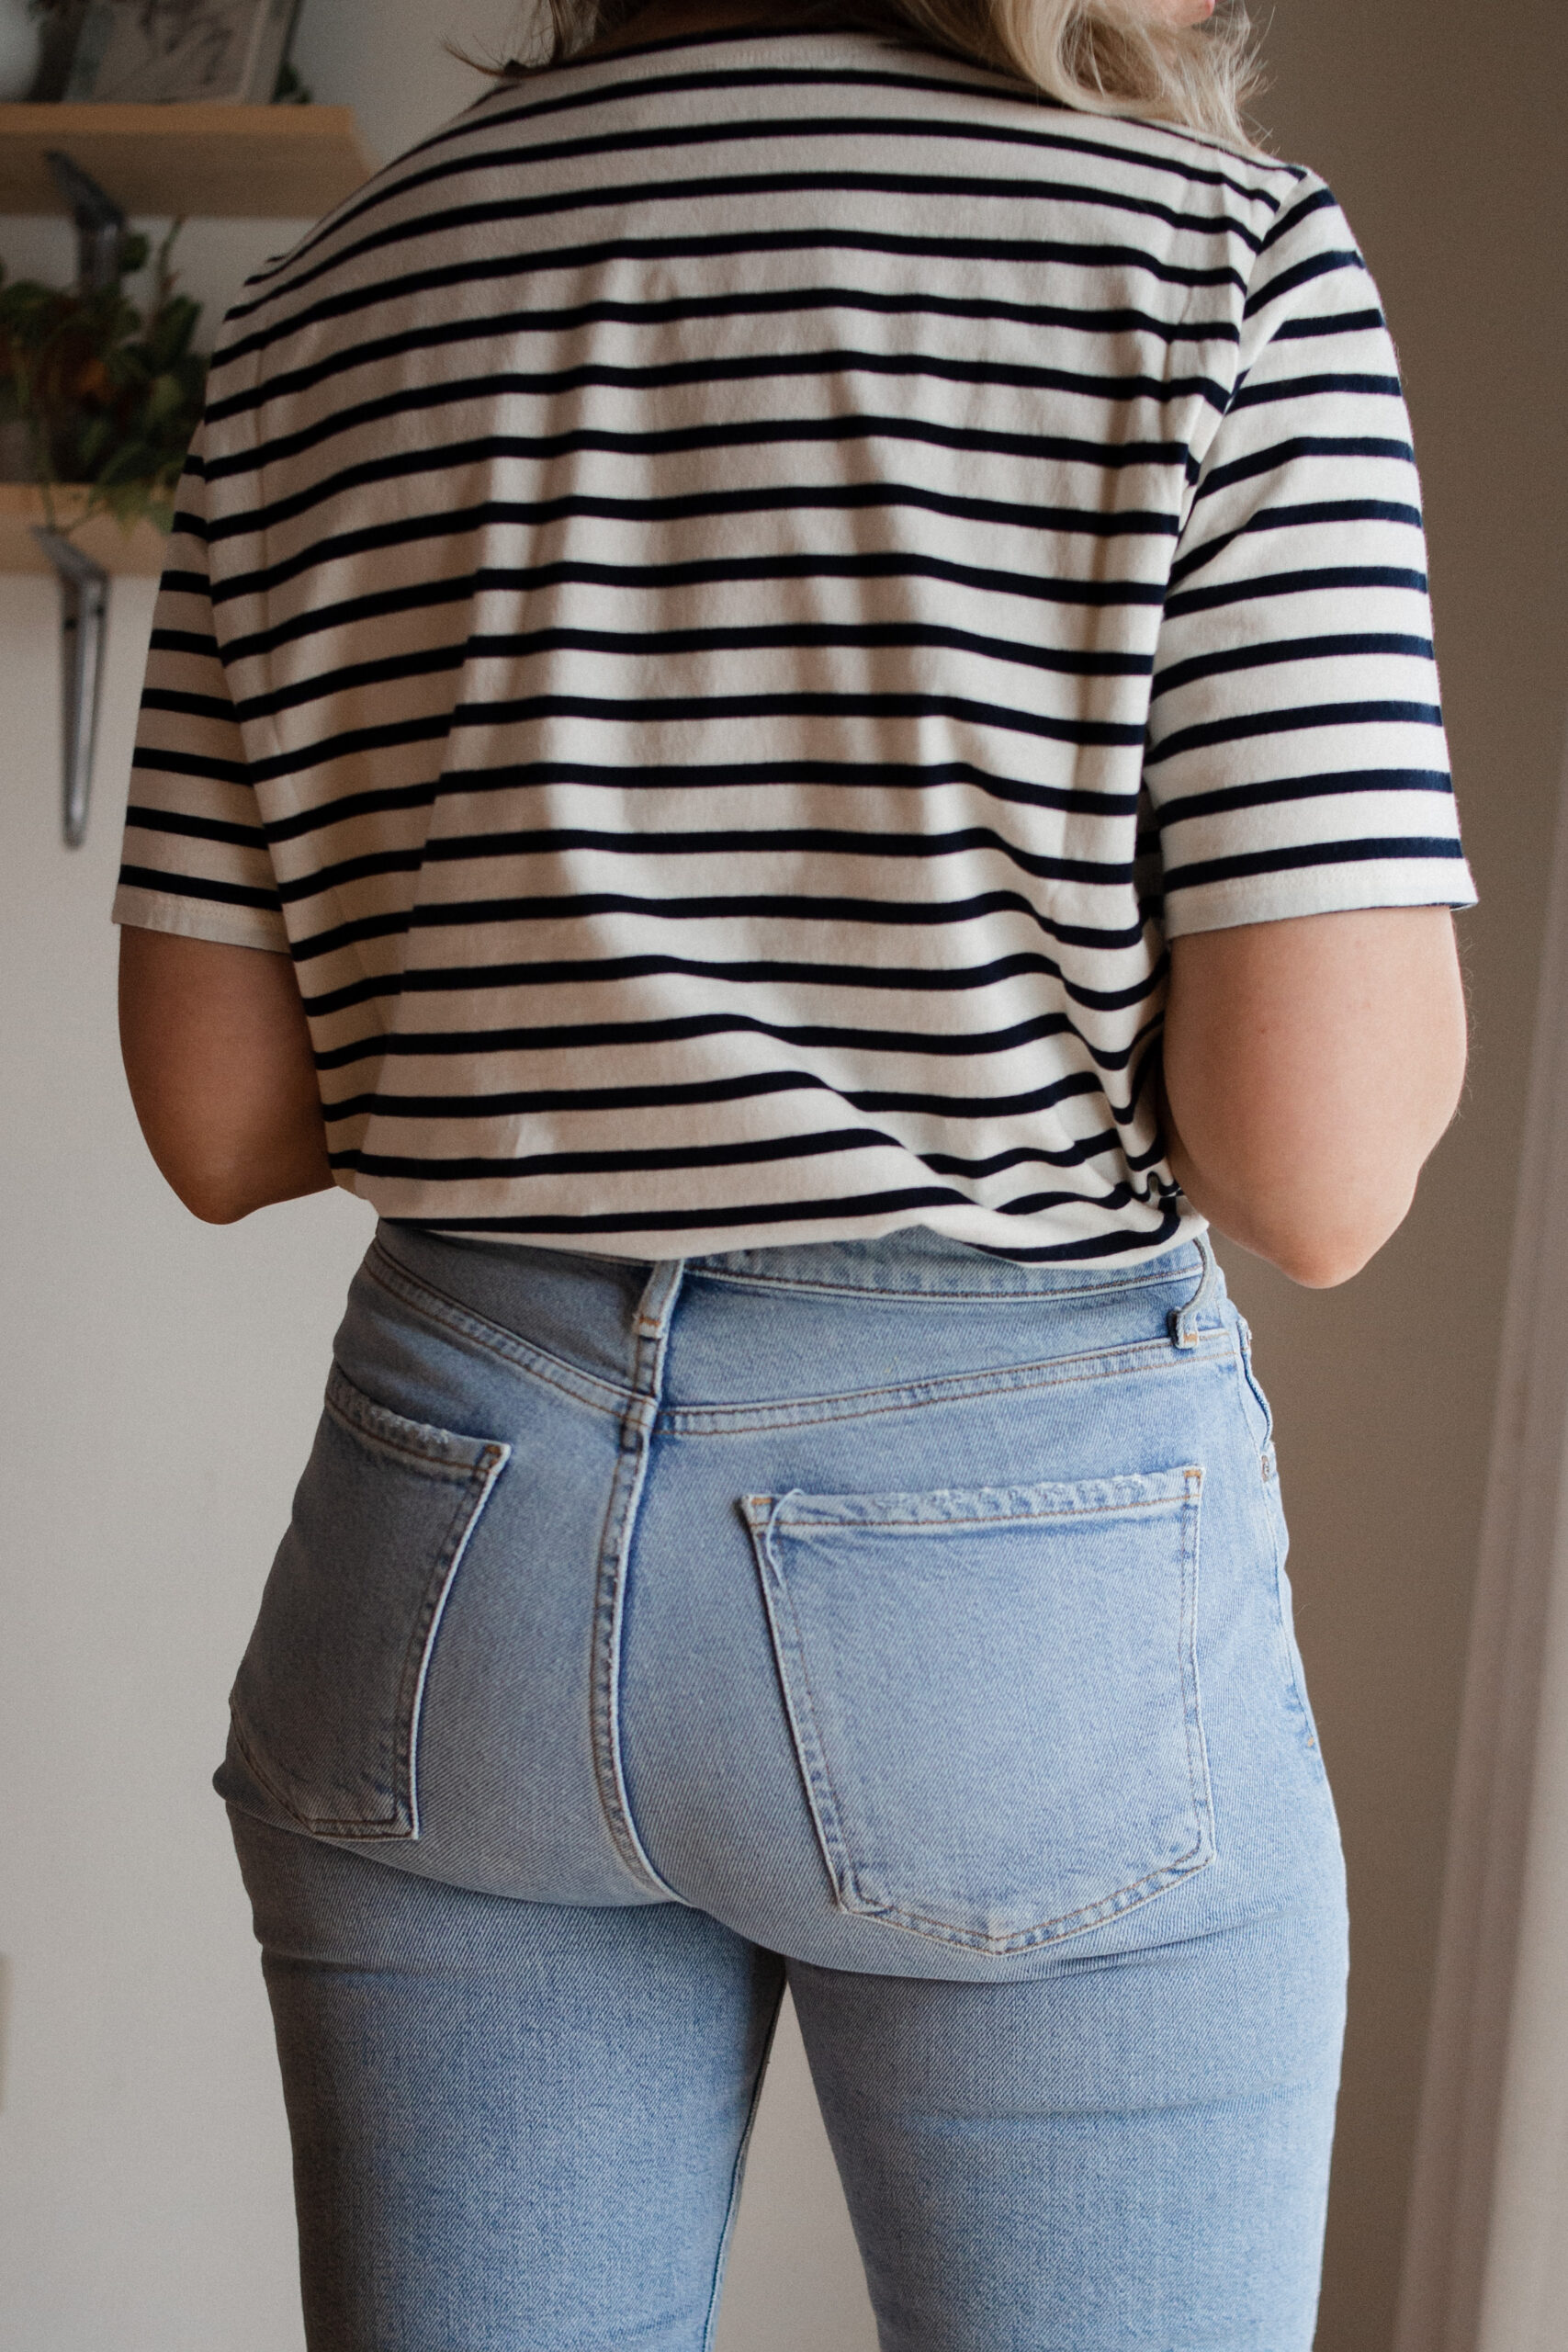 Karin Emily wears a black and white striped tee and the everlane rigid way high jeans for her Everlane Denim Guide